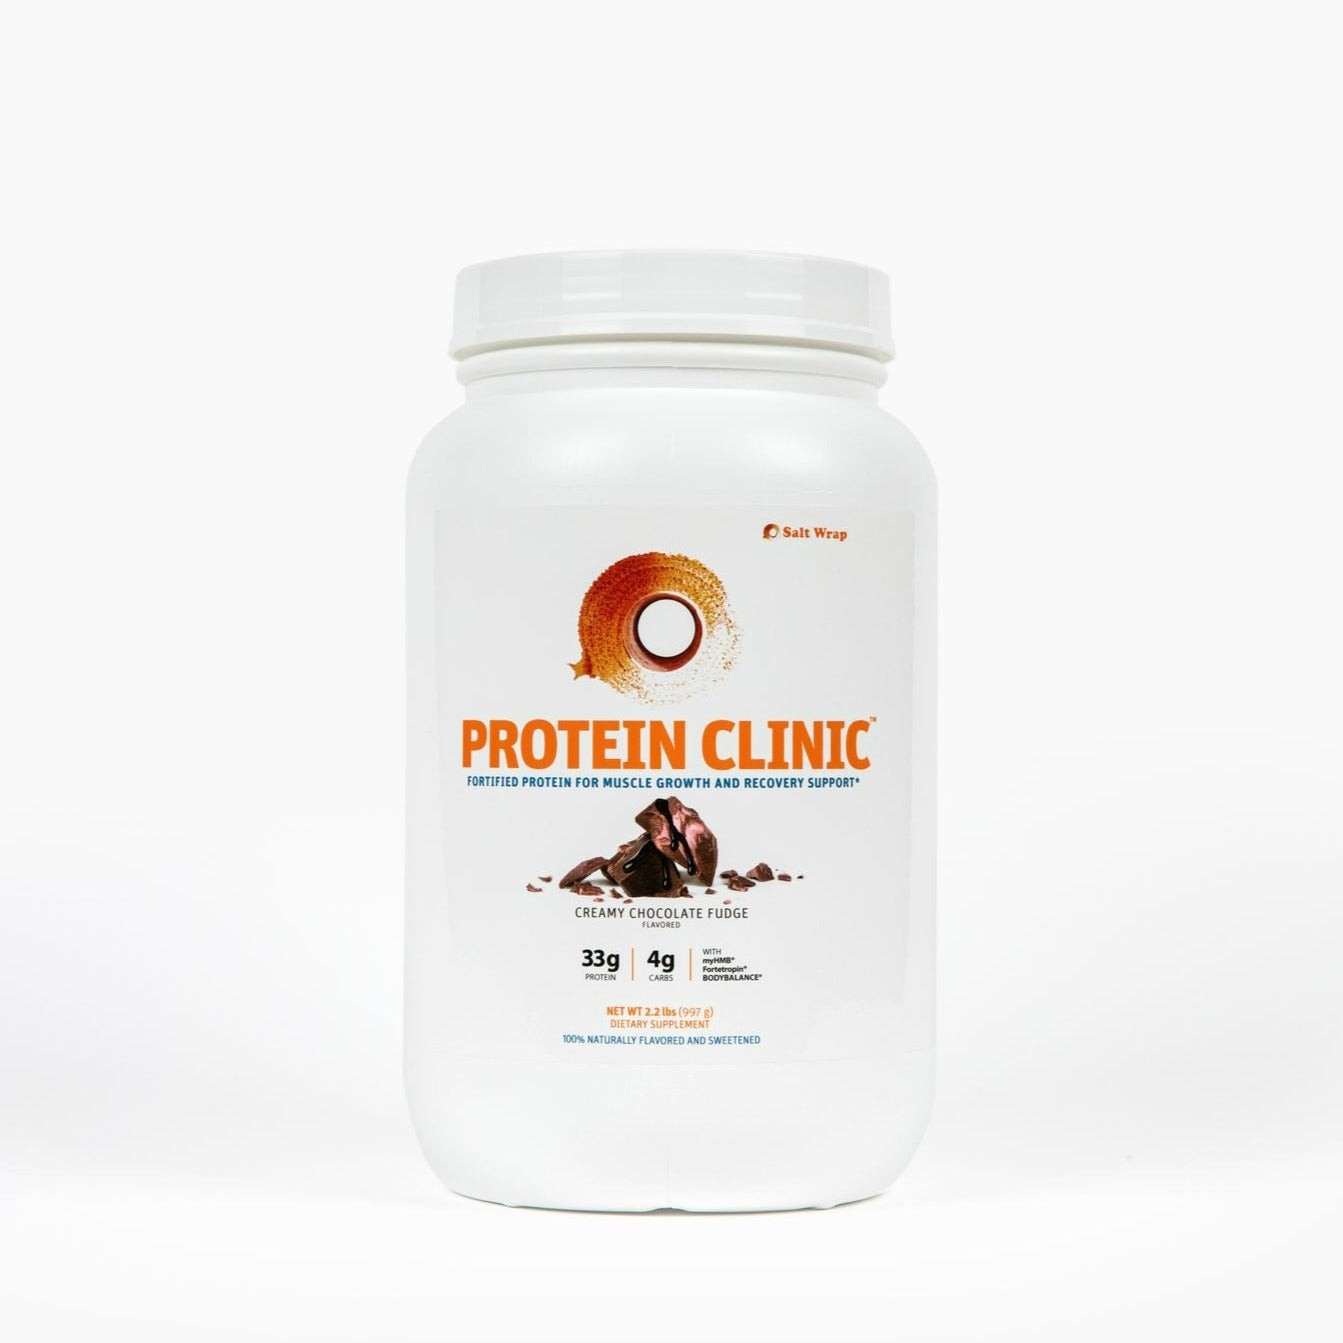 With Protein Clinic™, you can unlock your natural muscle-building potential with one convenient, delicious shake.